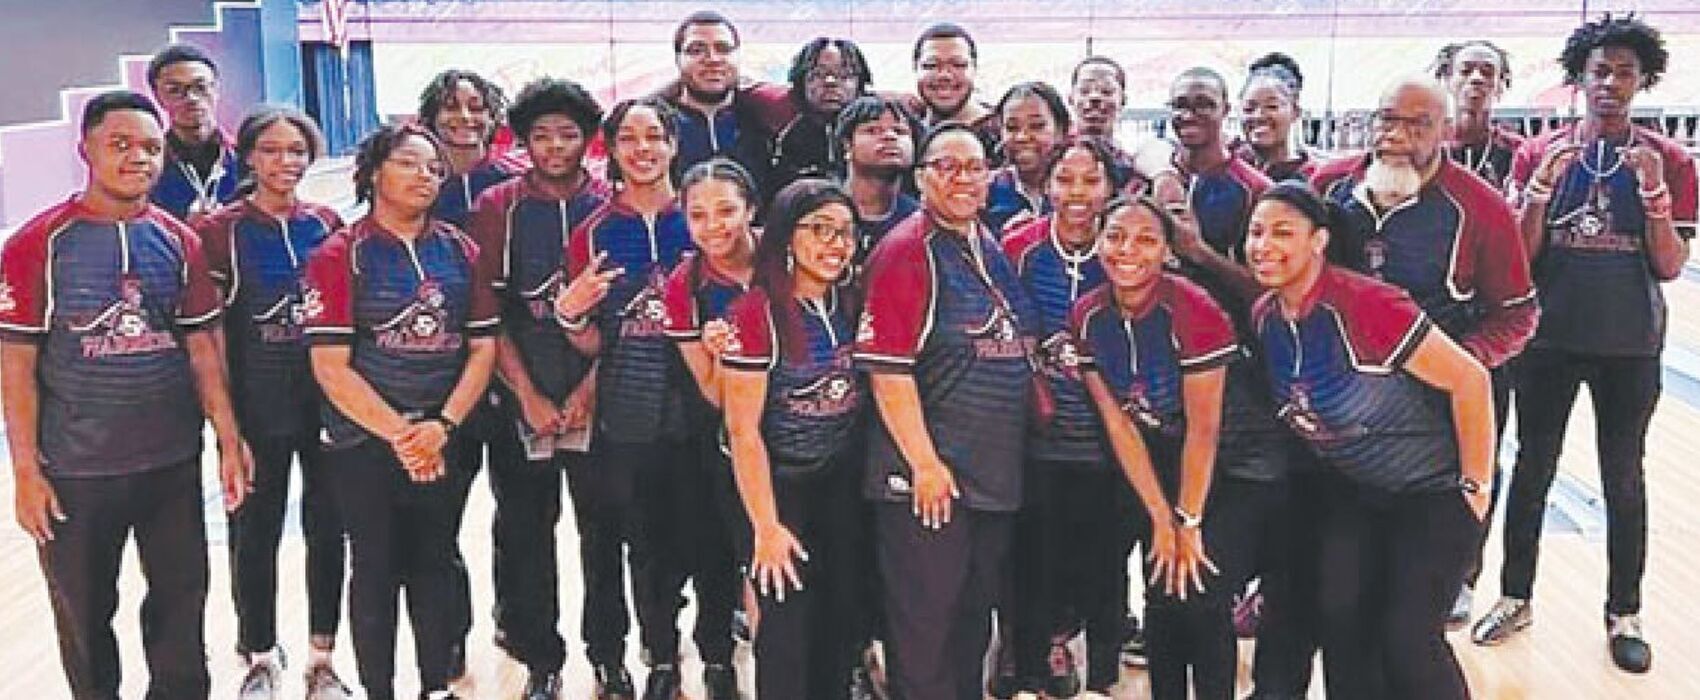 The U is well-represented on the A&T Bowling Team!